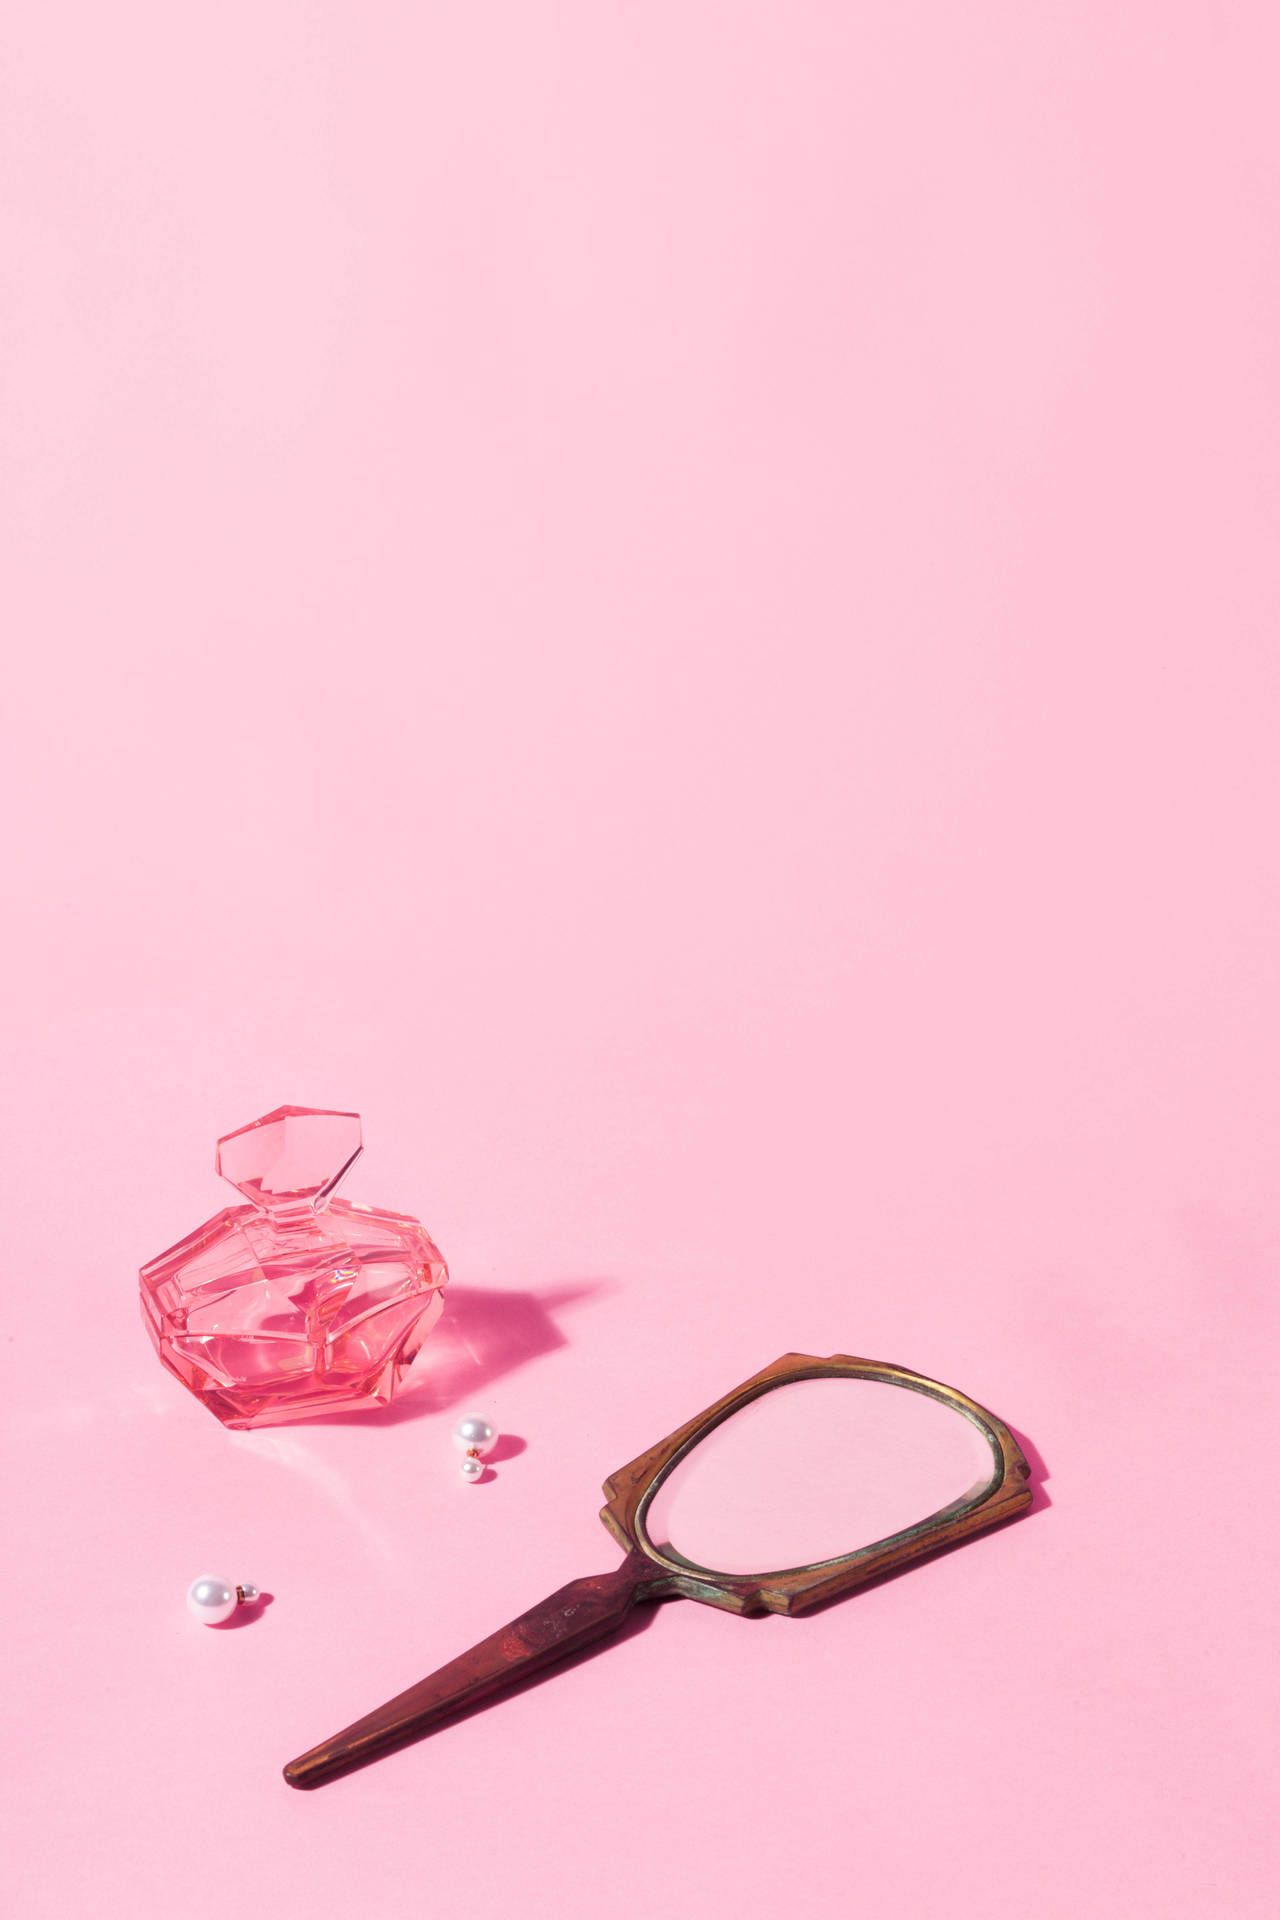 Trinkets On A Pink Color Background